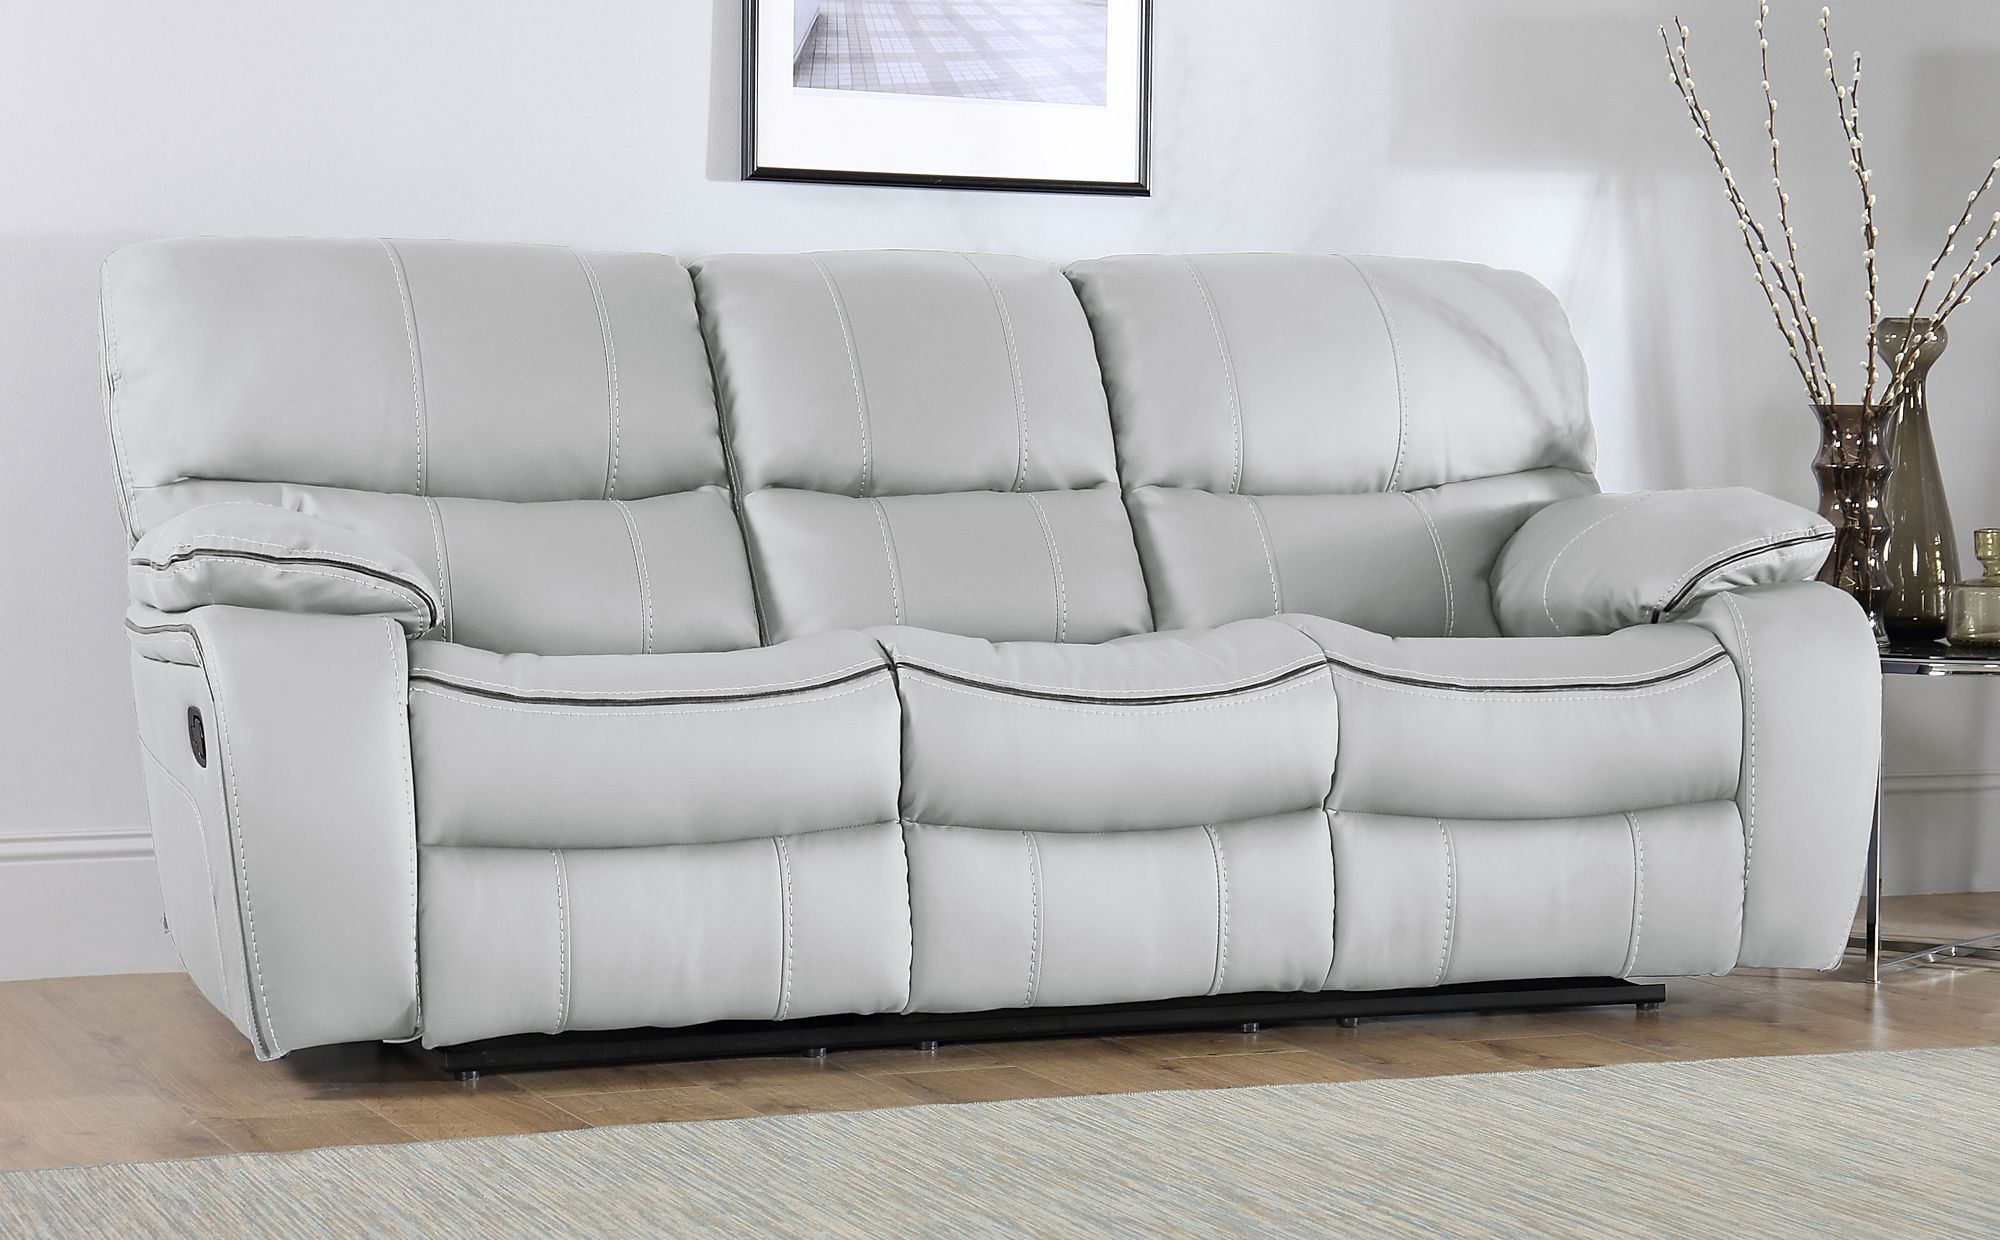 Beaumont Light Grey Leather 3 Seater Recliner Sofa | Furniture Choice Pertaining To Sofas In Light Grey (Gallery 16 of 20)